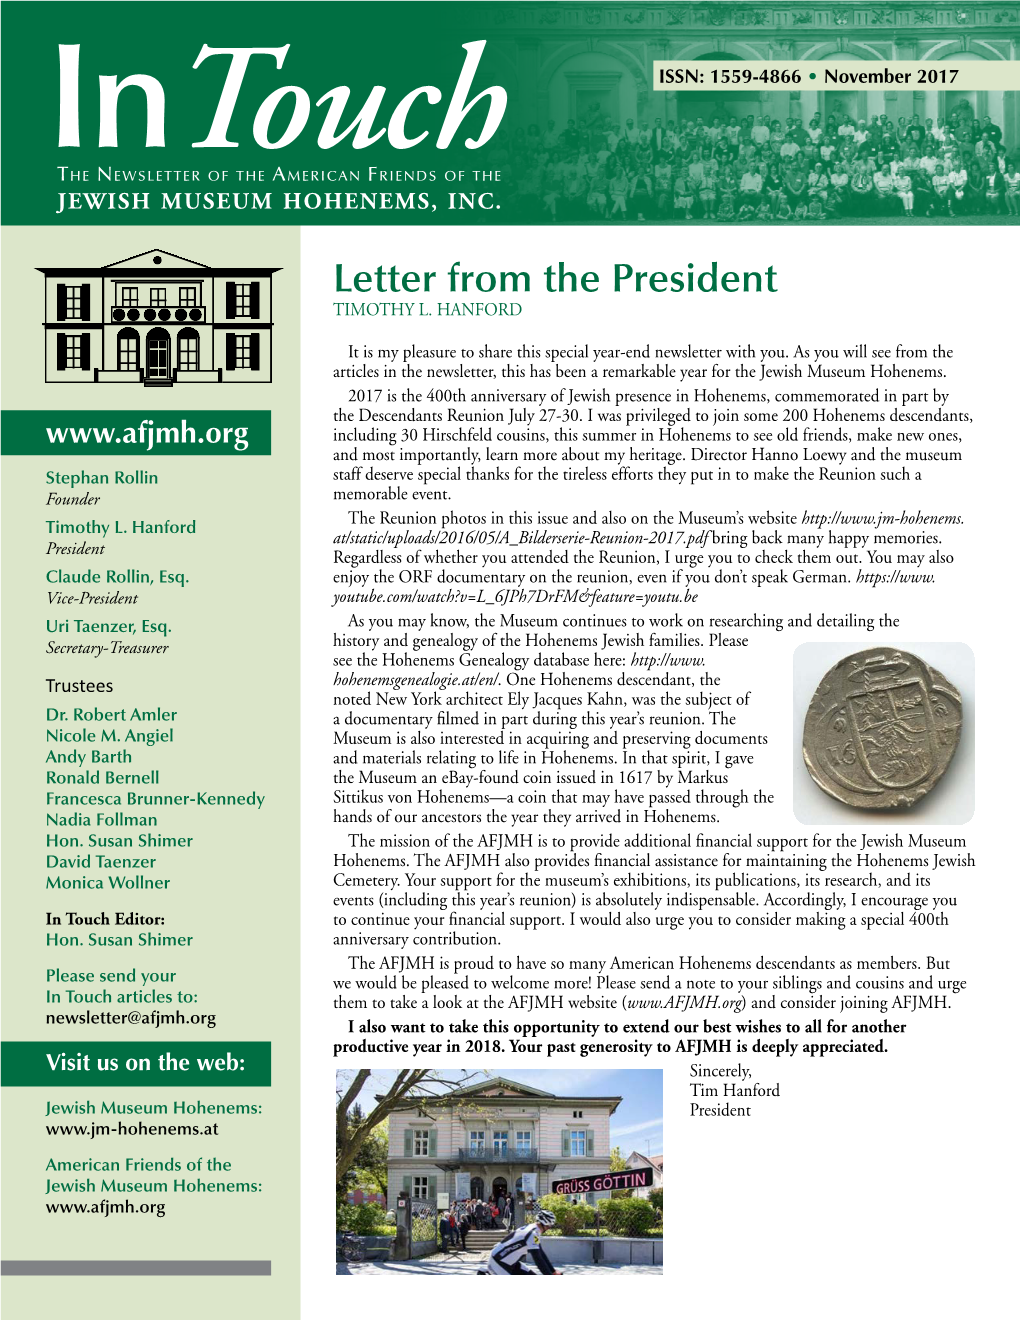 Letter from the President TIMOTHY L